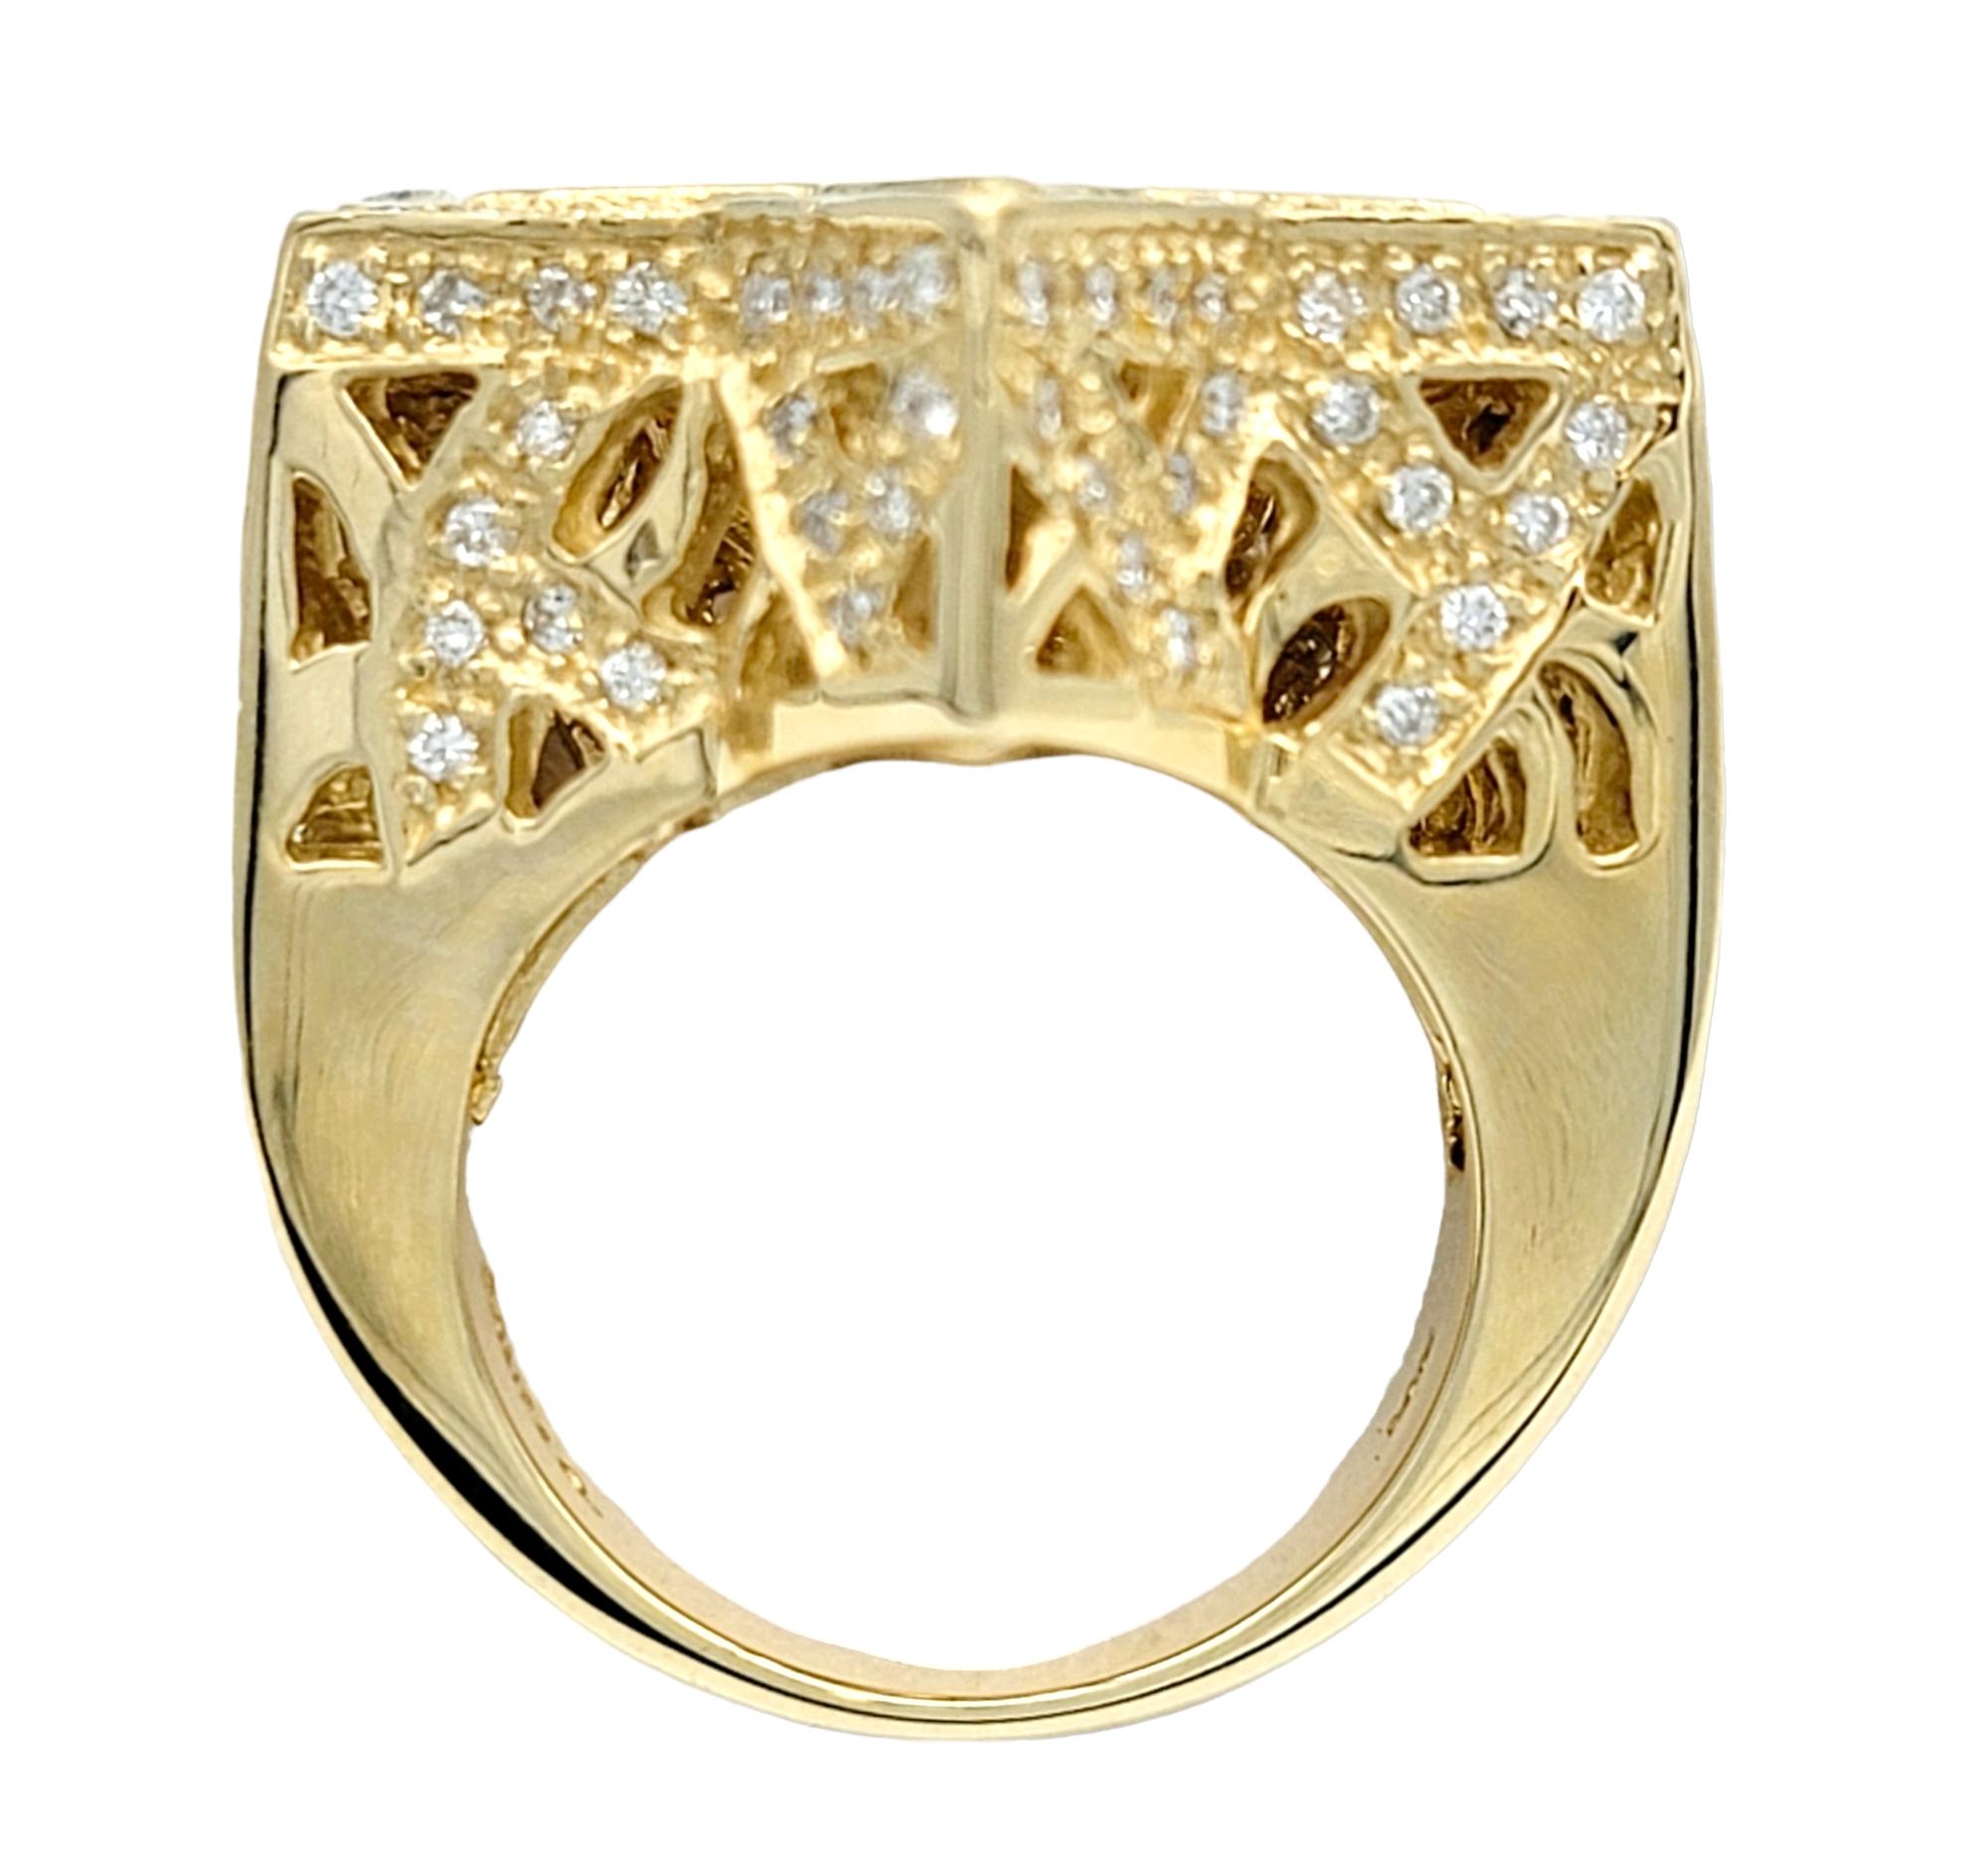 Sonia B. Designs 8.00 Carat Citrine and Diamond Chunky Gold Star Cocktail Ring  In Good Condition For Sale In Scottsdale, AZ